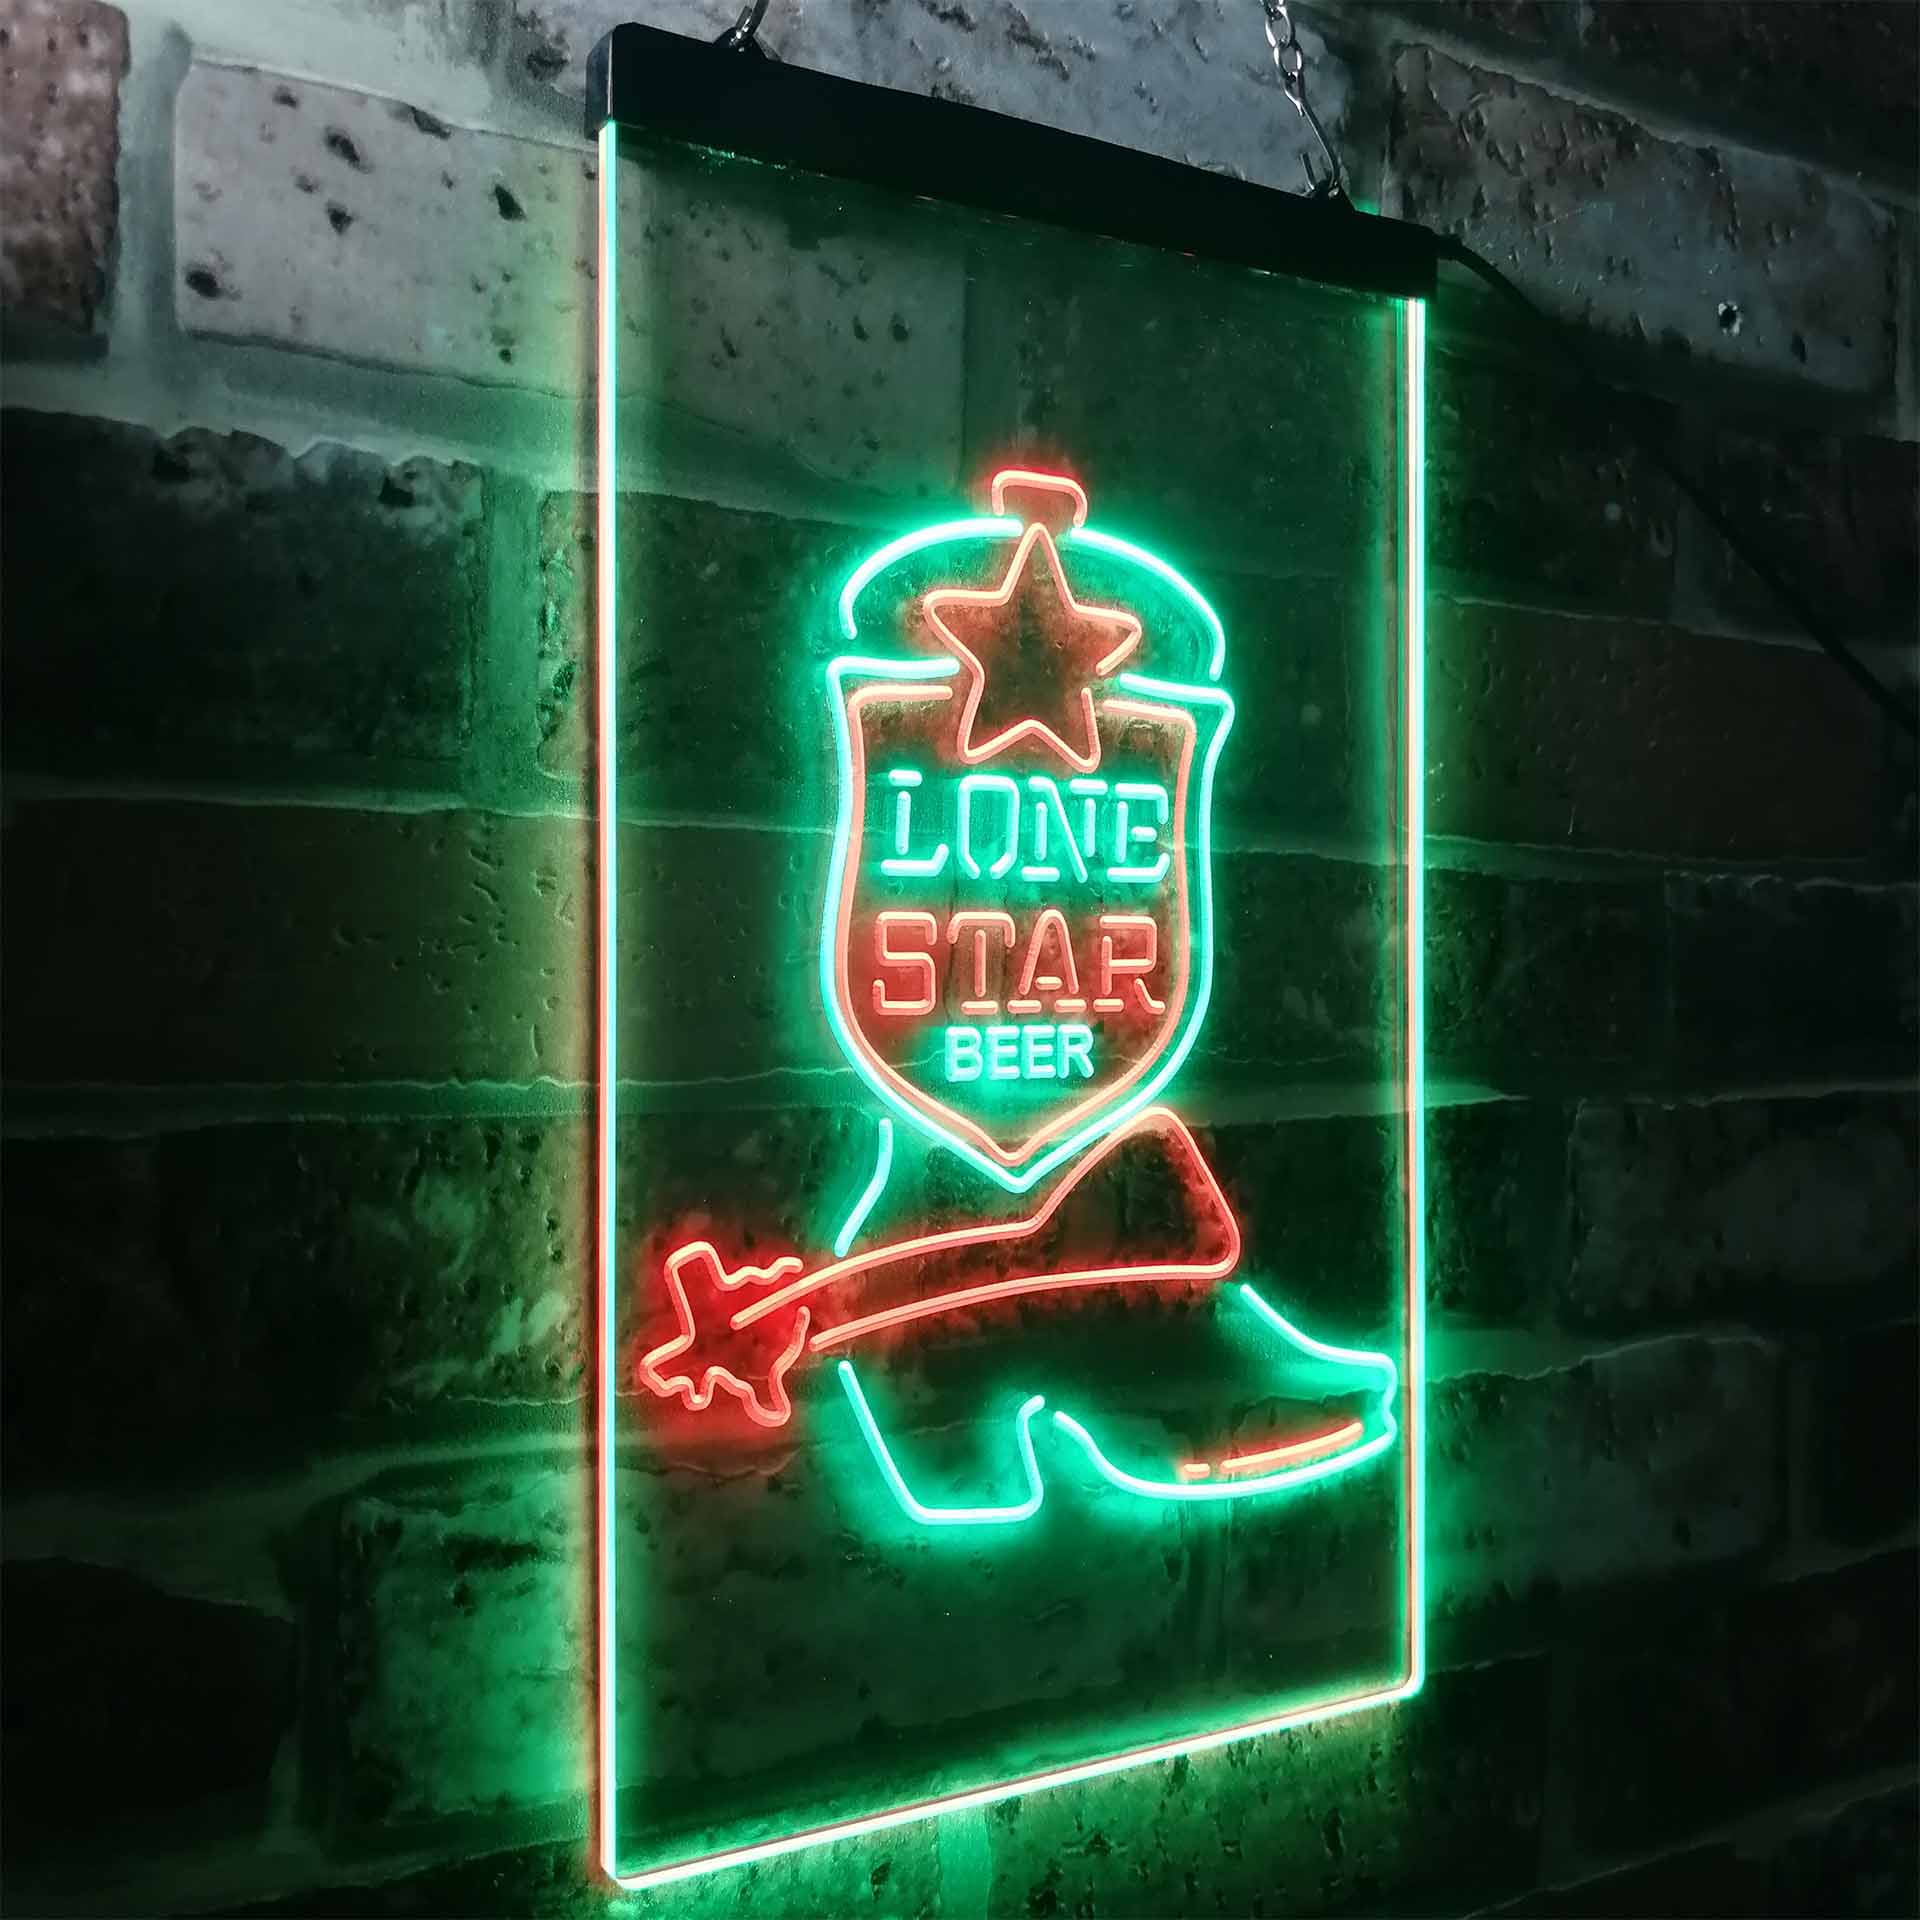 Cold Beer - Neon Signs Depot